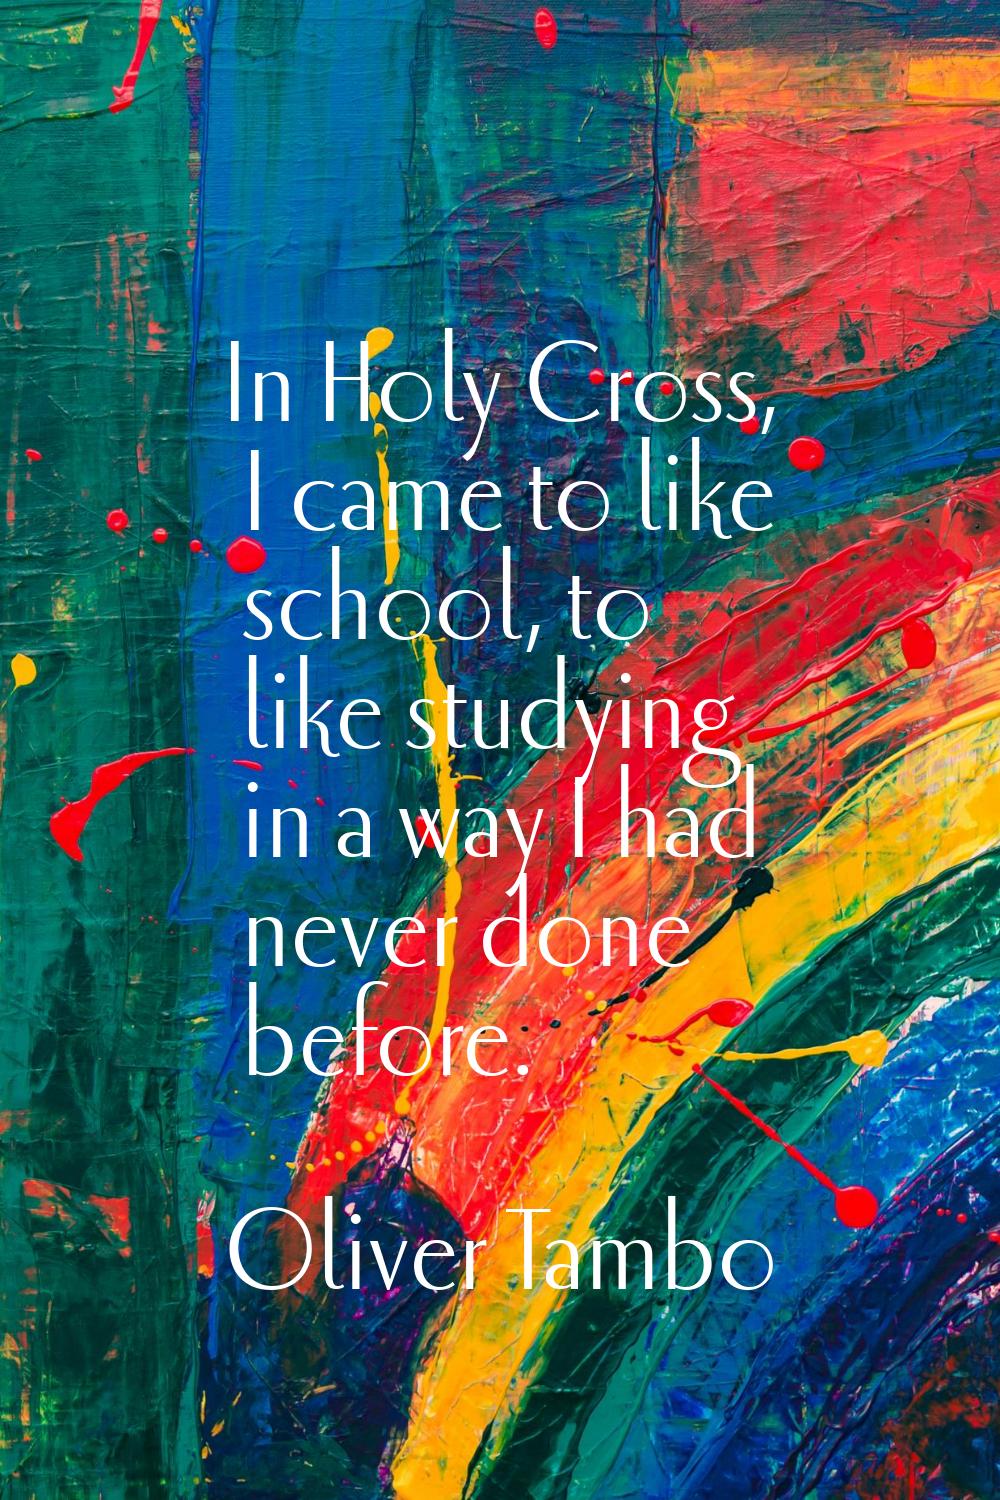 In Holy Cross, I came to like school, to like studying in a way I had never done before.